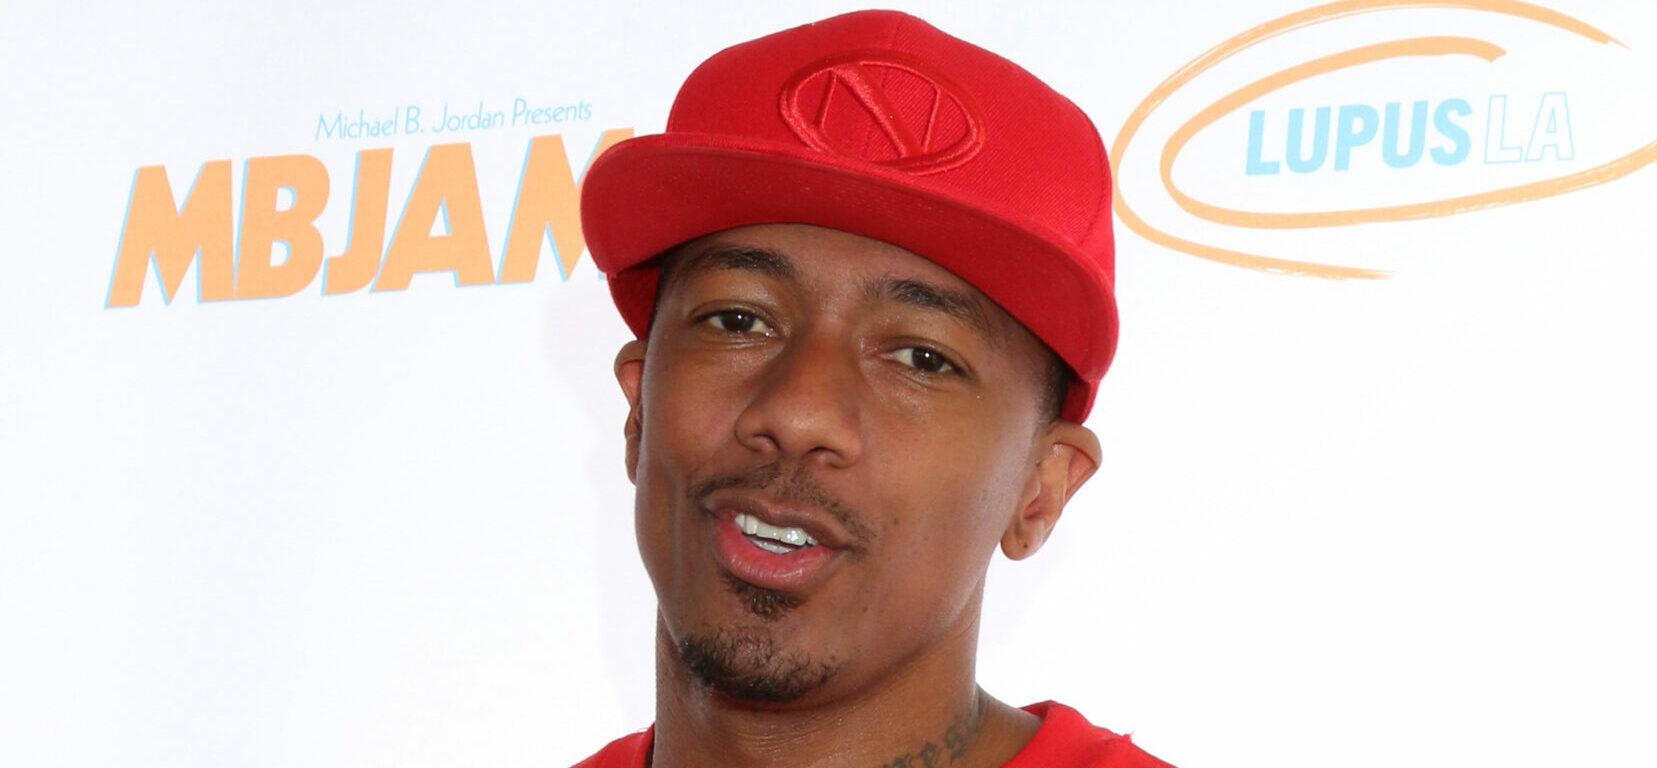 Nick Cannon at the 3rd Annual MBJAM19 - Los Angeles